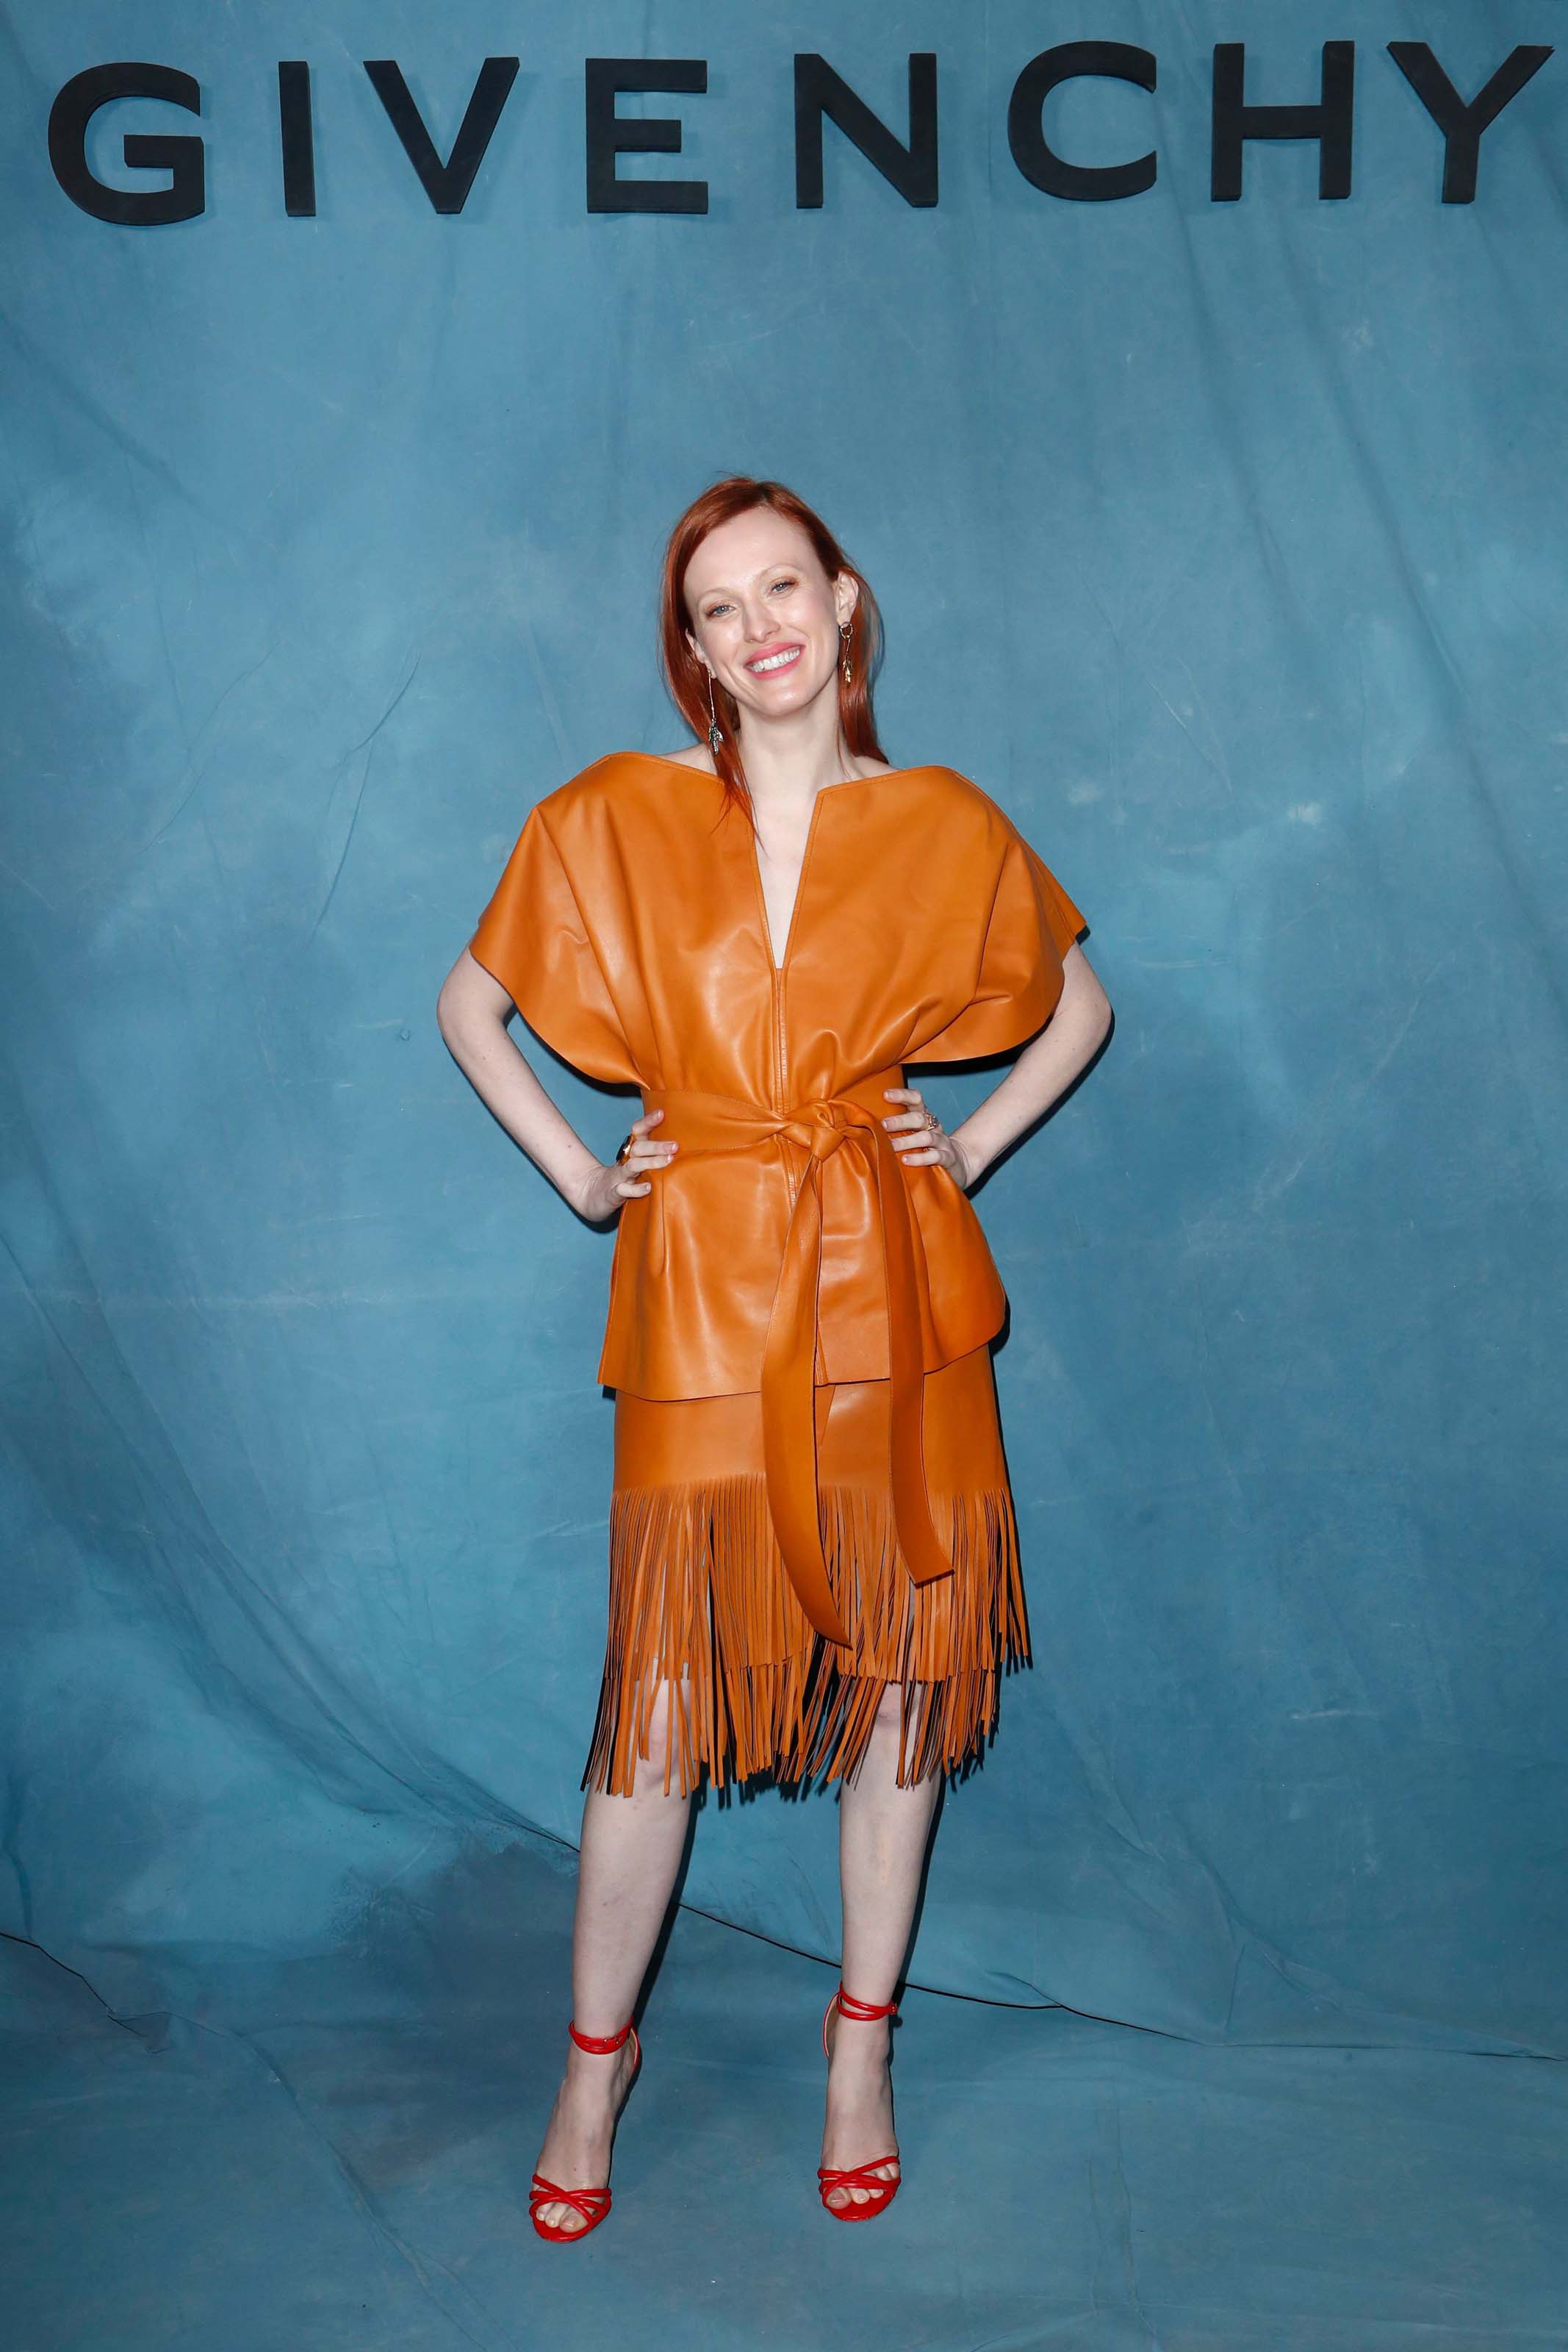 Karen Elson attends Givenchy show